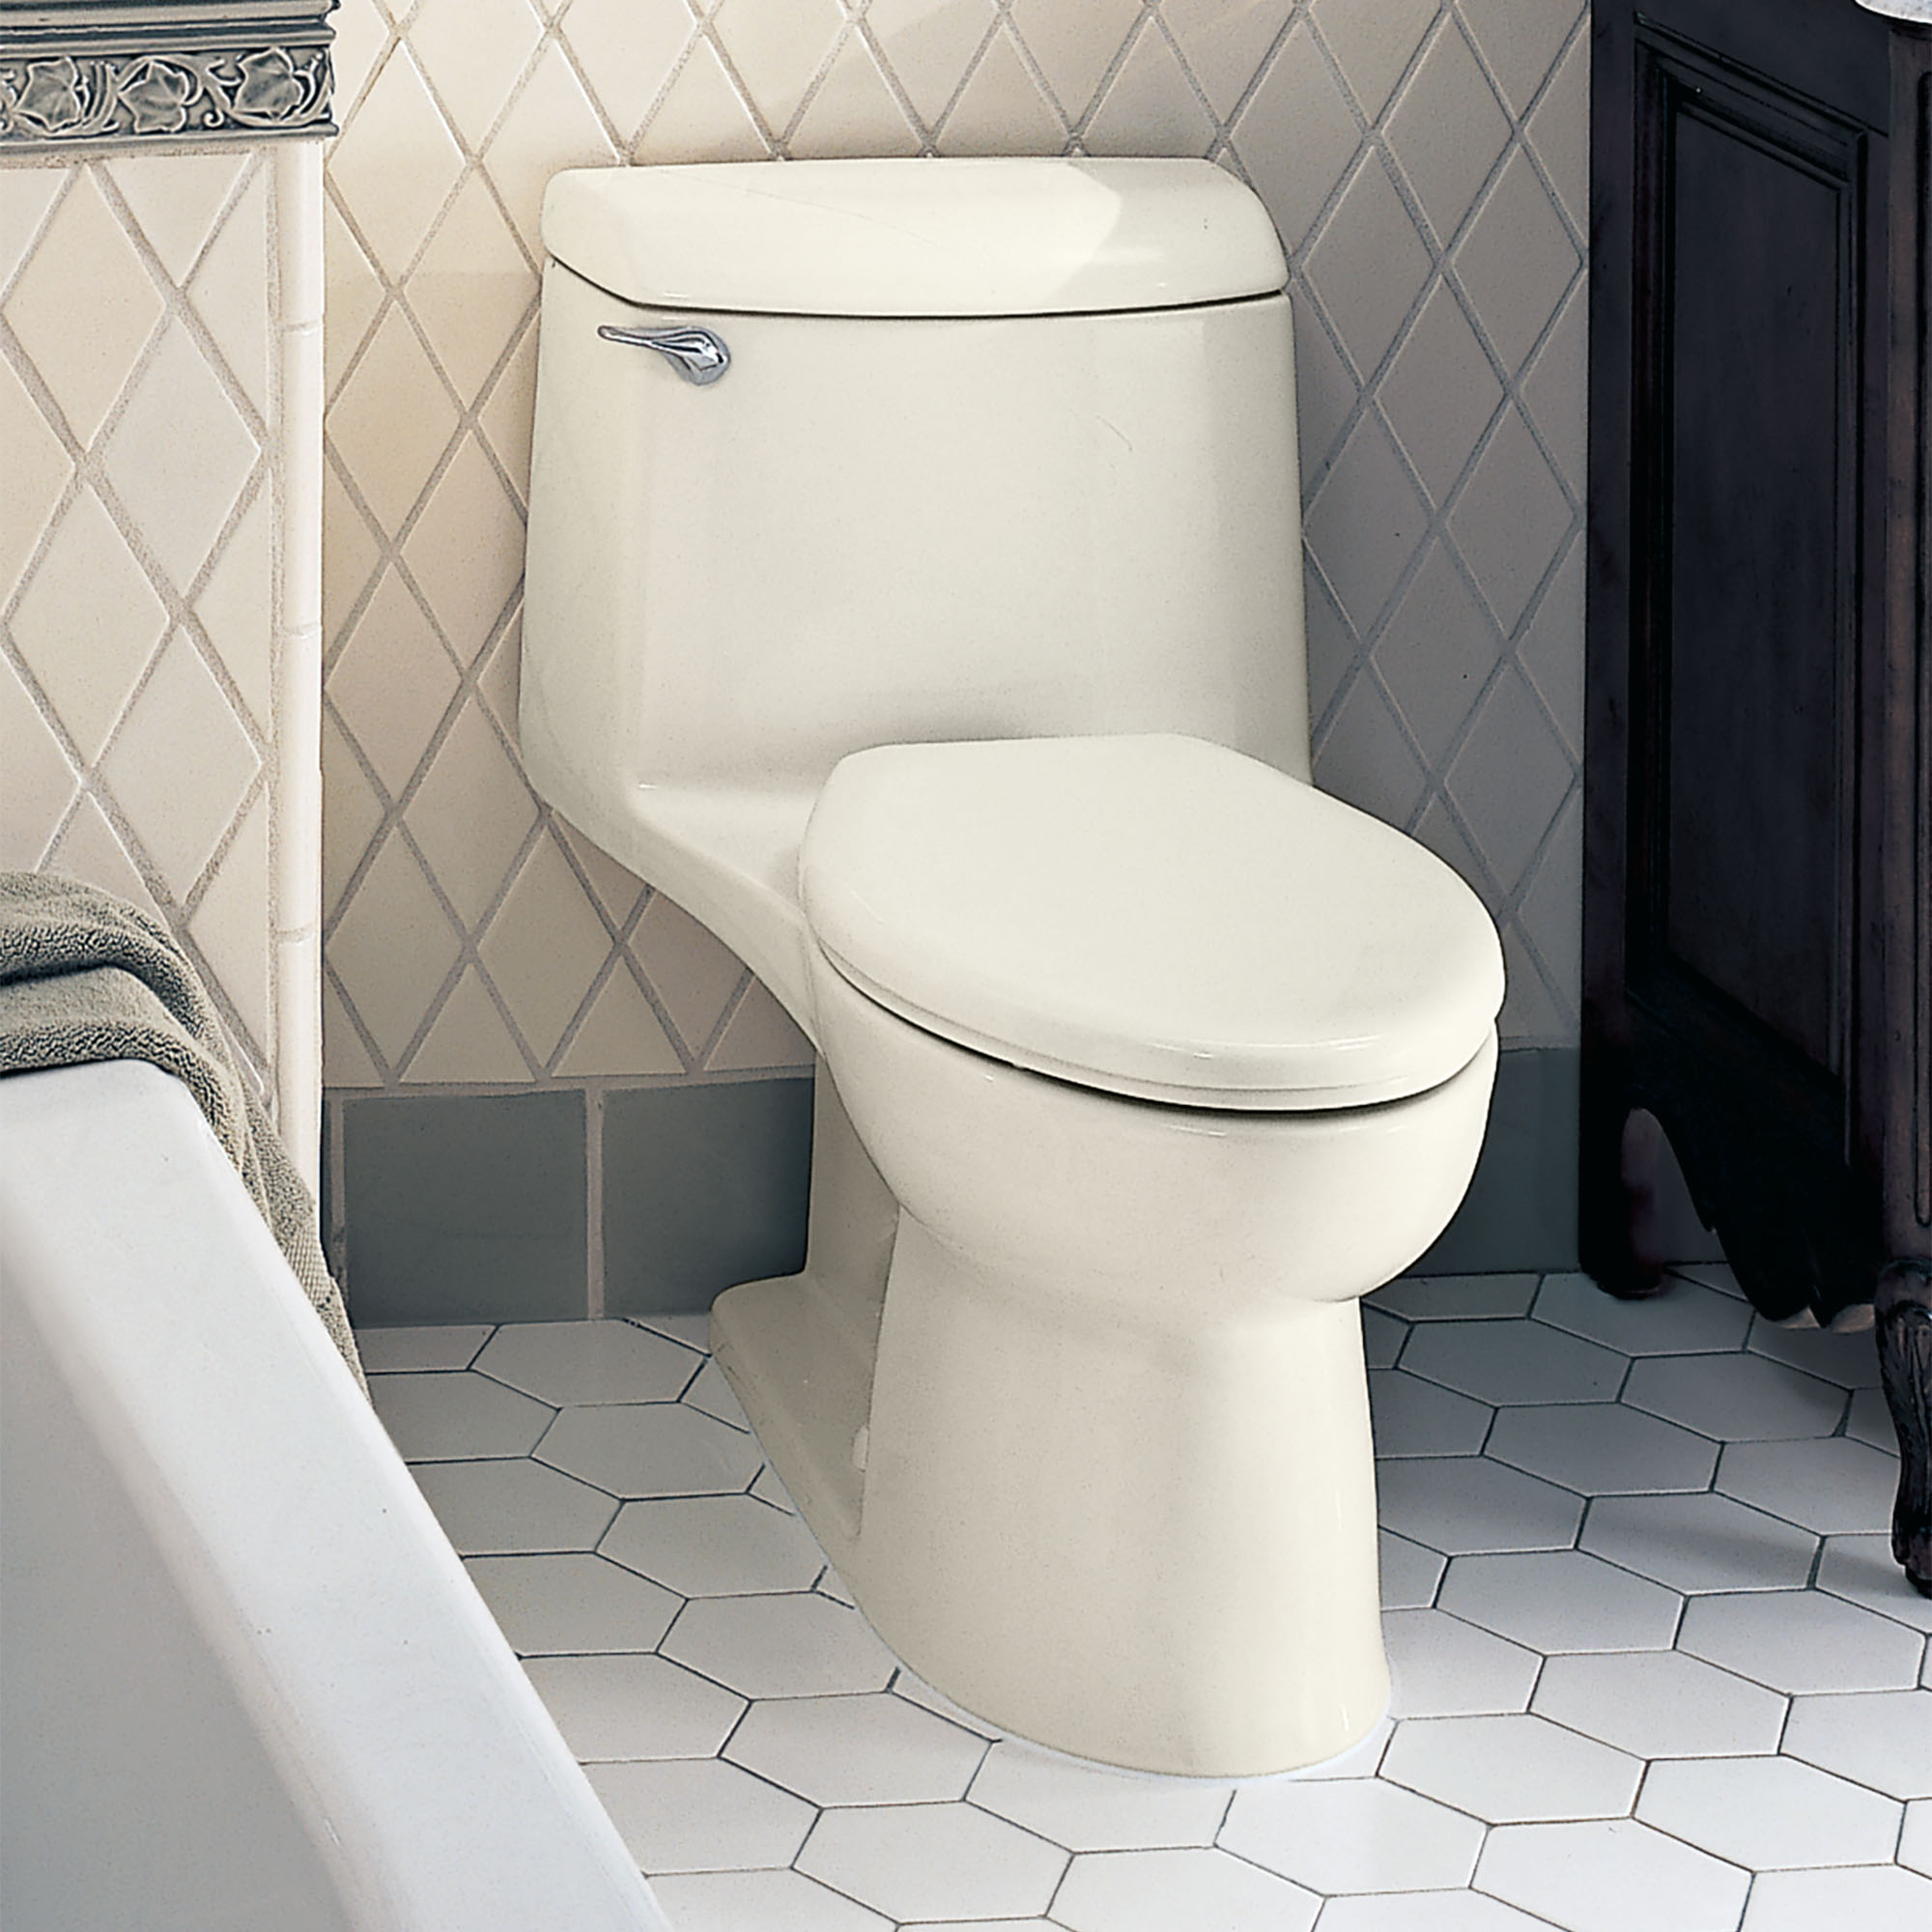 Champion® 4 One-Piece 1.6 gpf/6.0 Lpf Chair Height Elongated Toilet With Seat